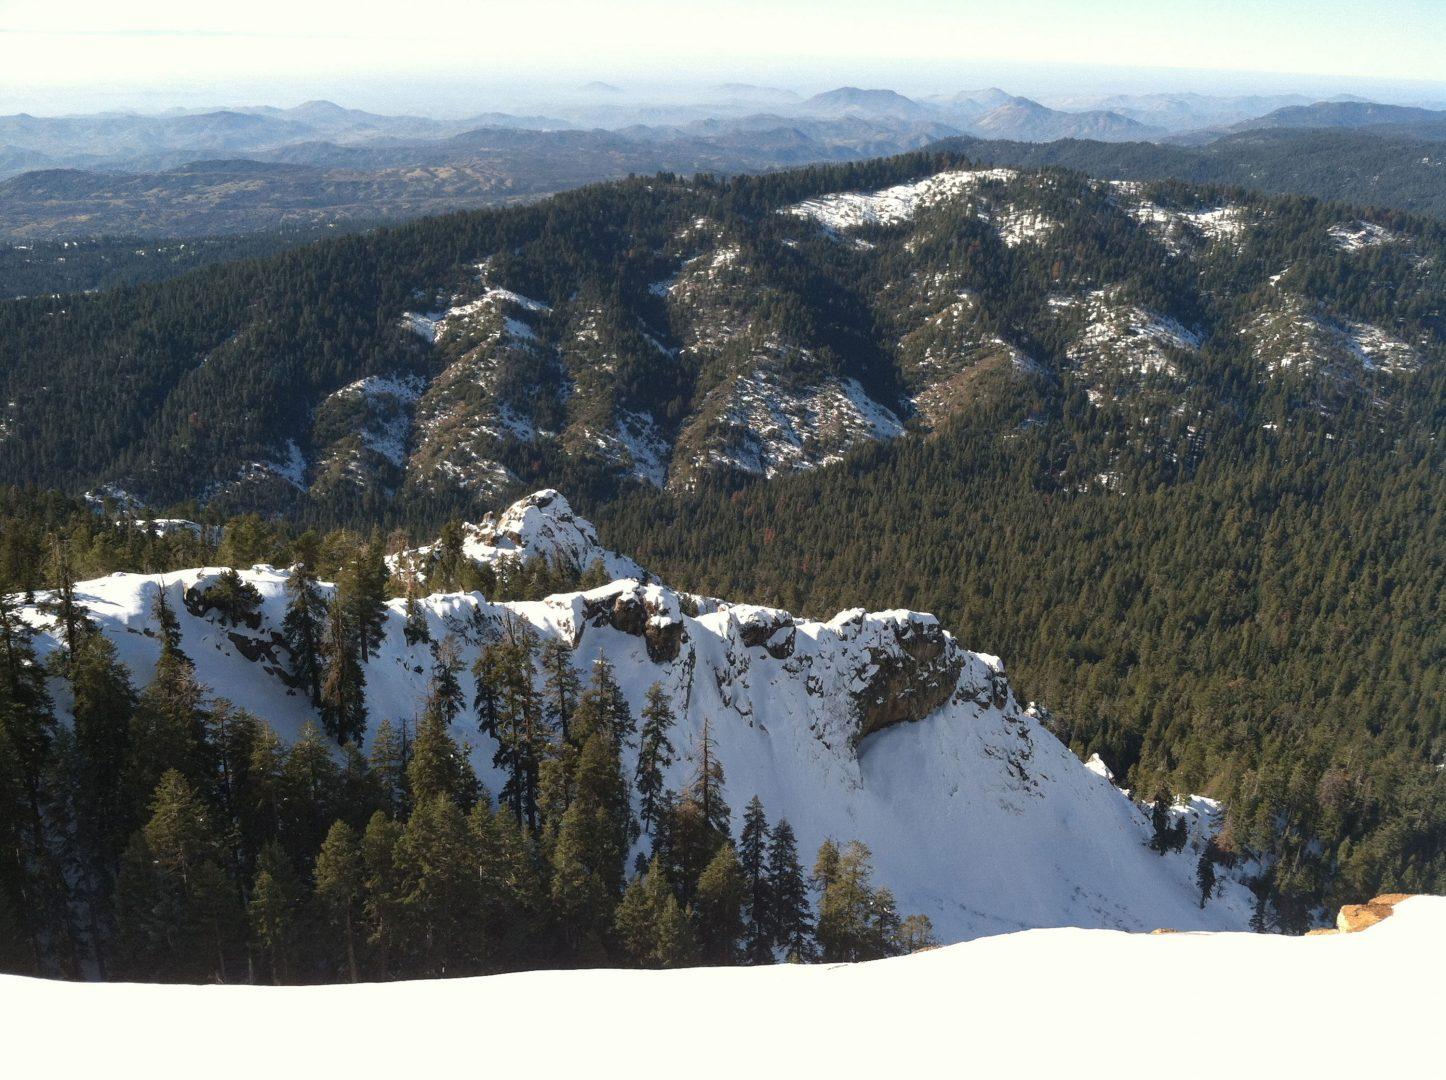 Redwood Canyon, one of the worlds largest giant sequoia grove and the San Joaquin Valley as seen from the summit of Big Baldy located on the western edge of Kings Canyon National Park.

(Marek Warszawski/TNS)